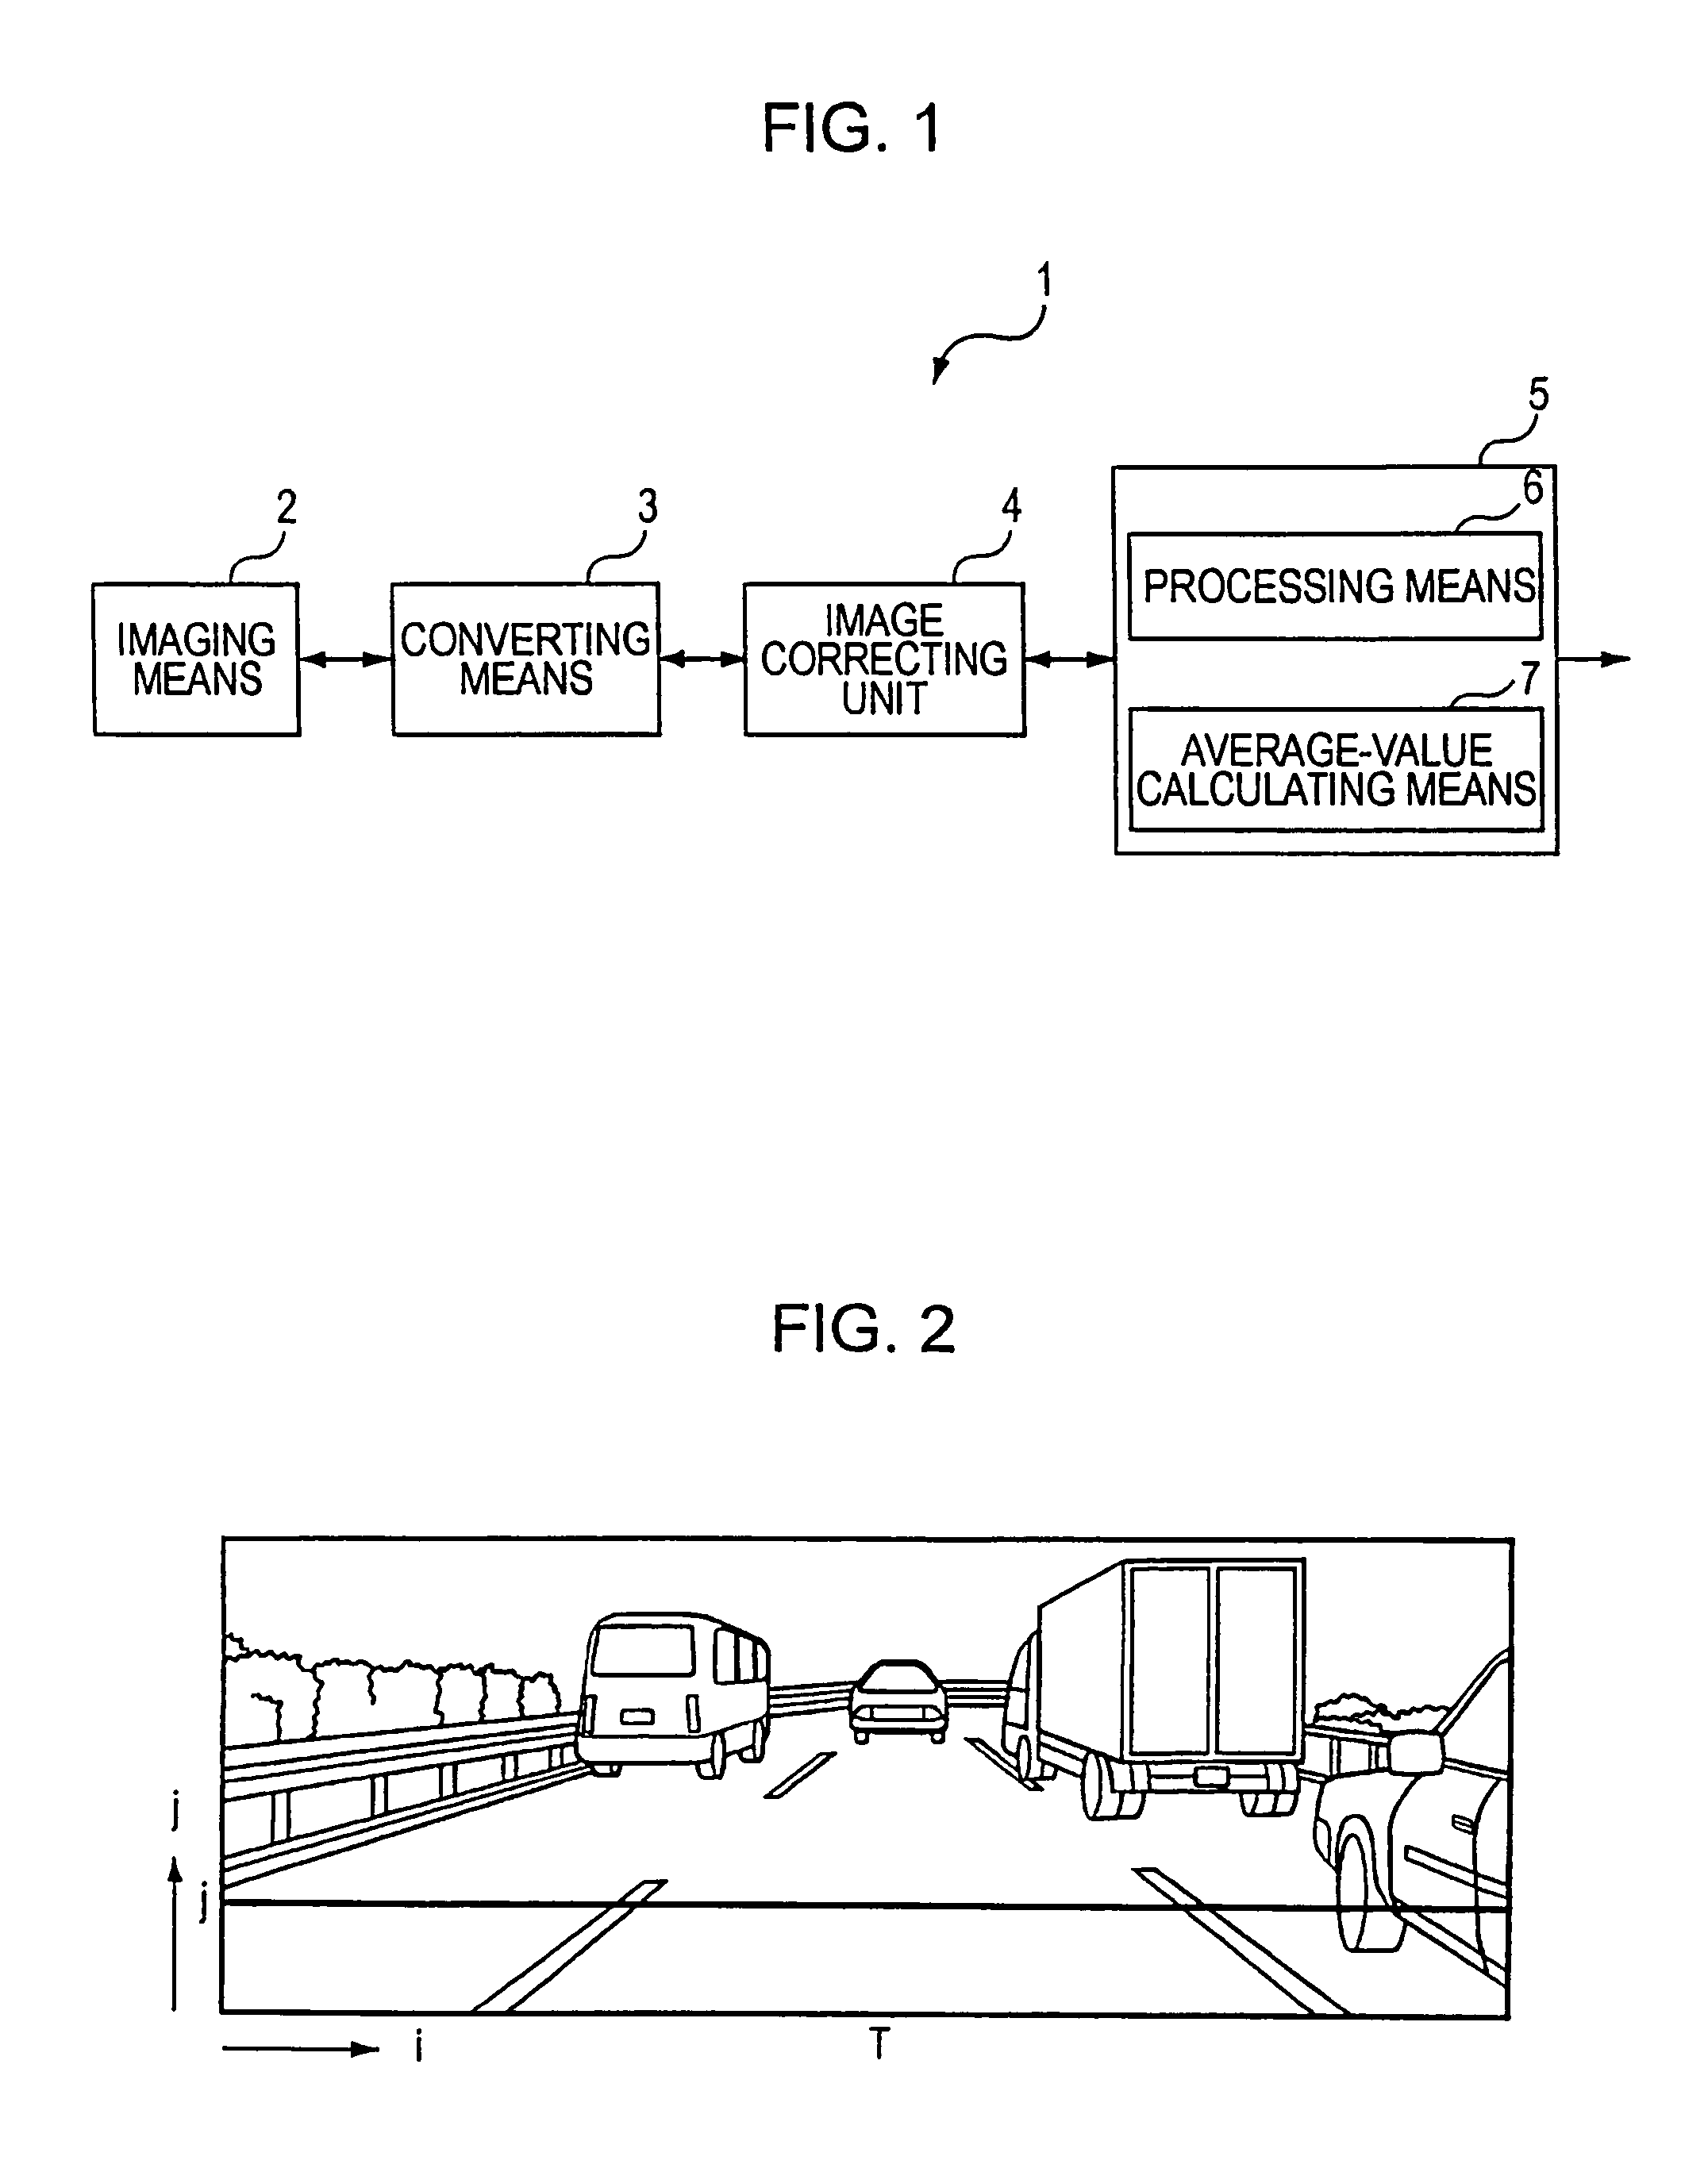 Image processing device for dividing an image into a plurality of regions